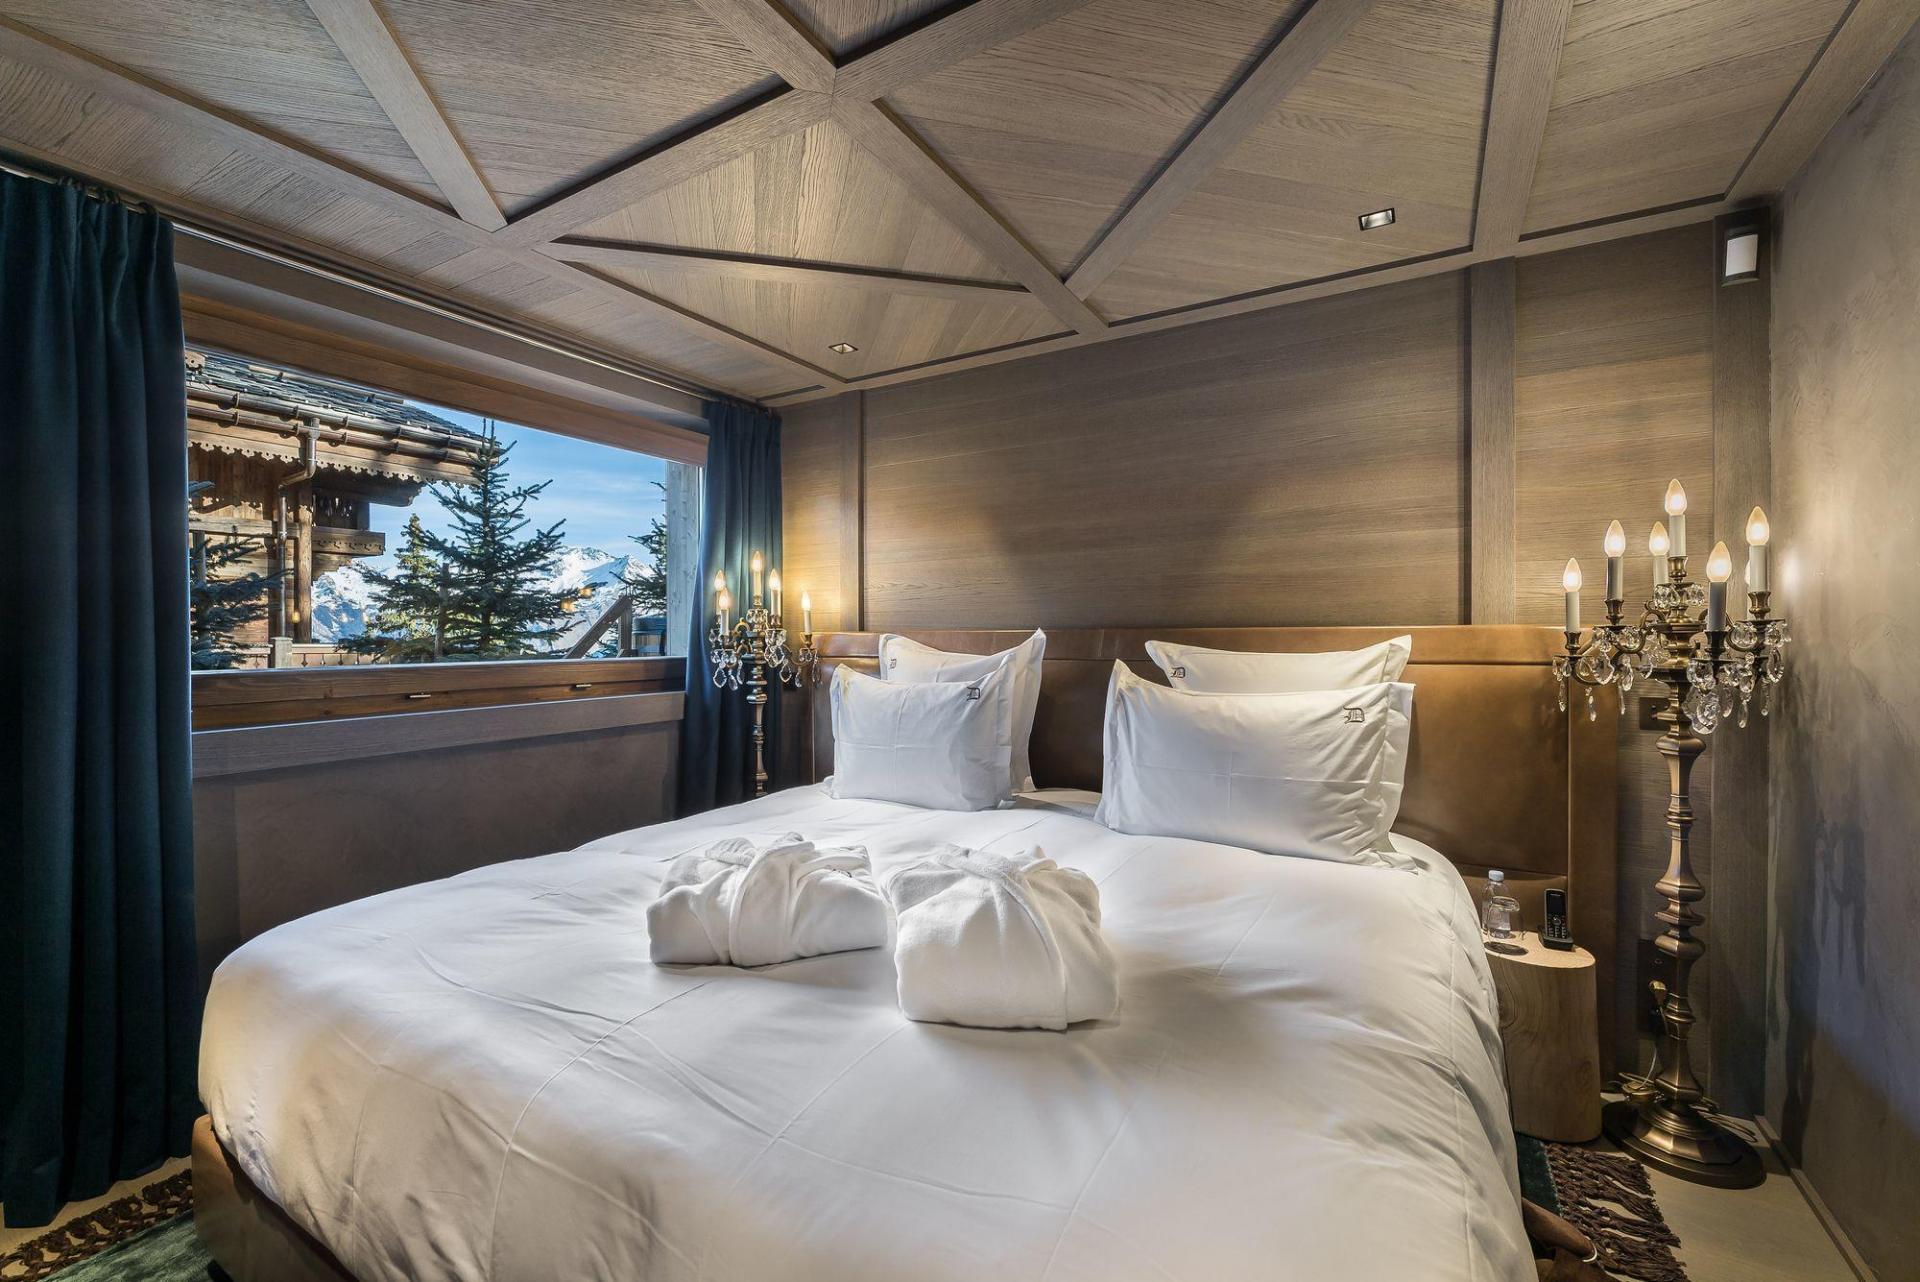 BEAUTIFUL BEDROOM IN THE CHALET LE PALACE IN COURCHEVEL